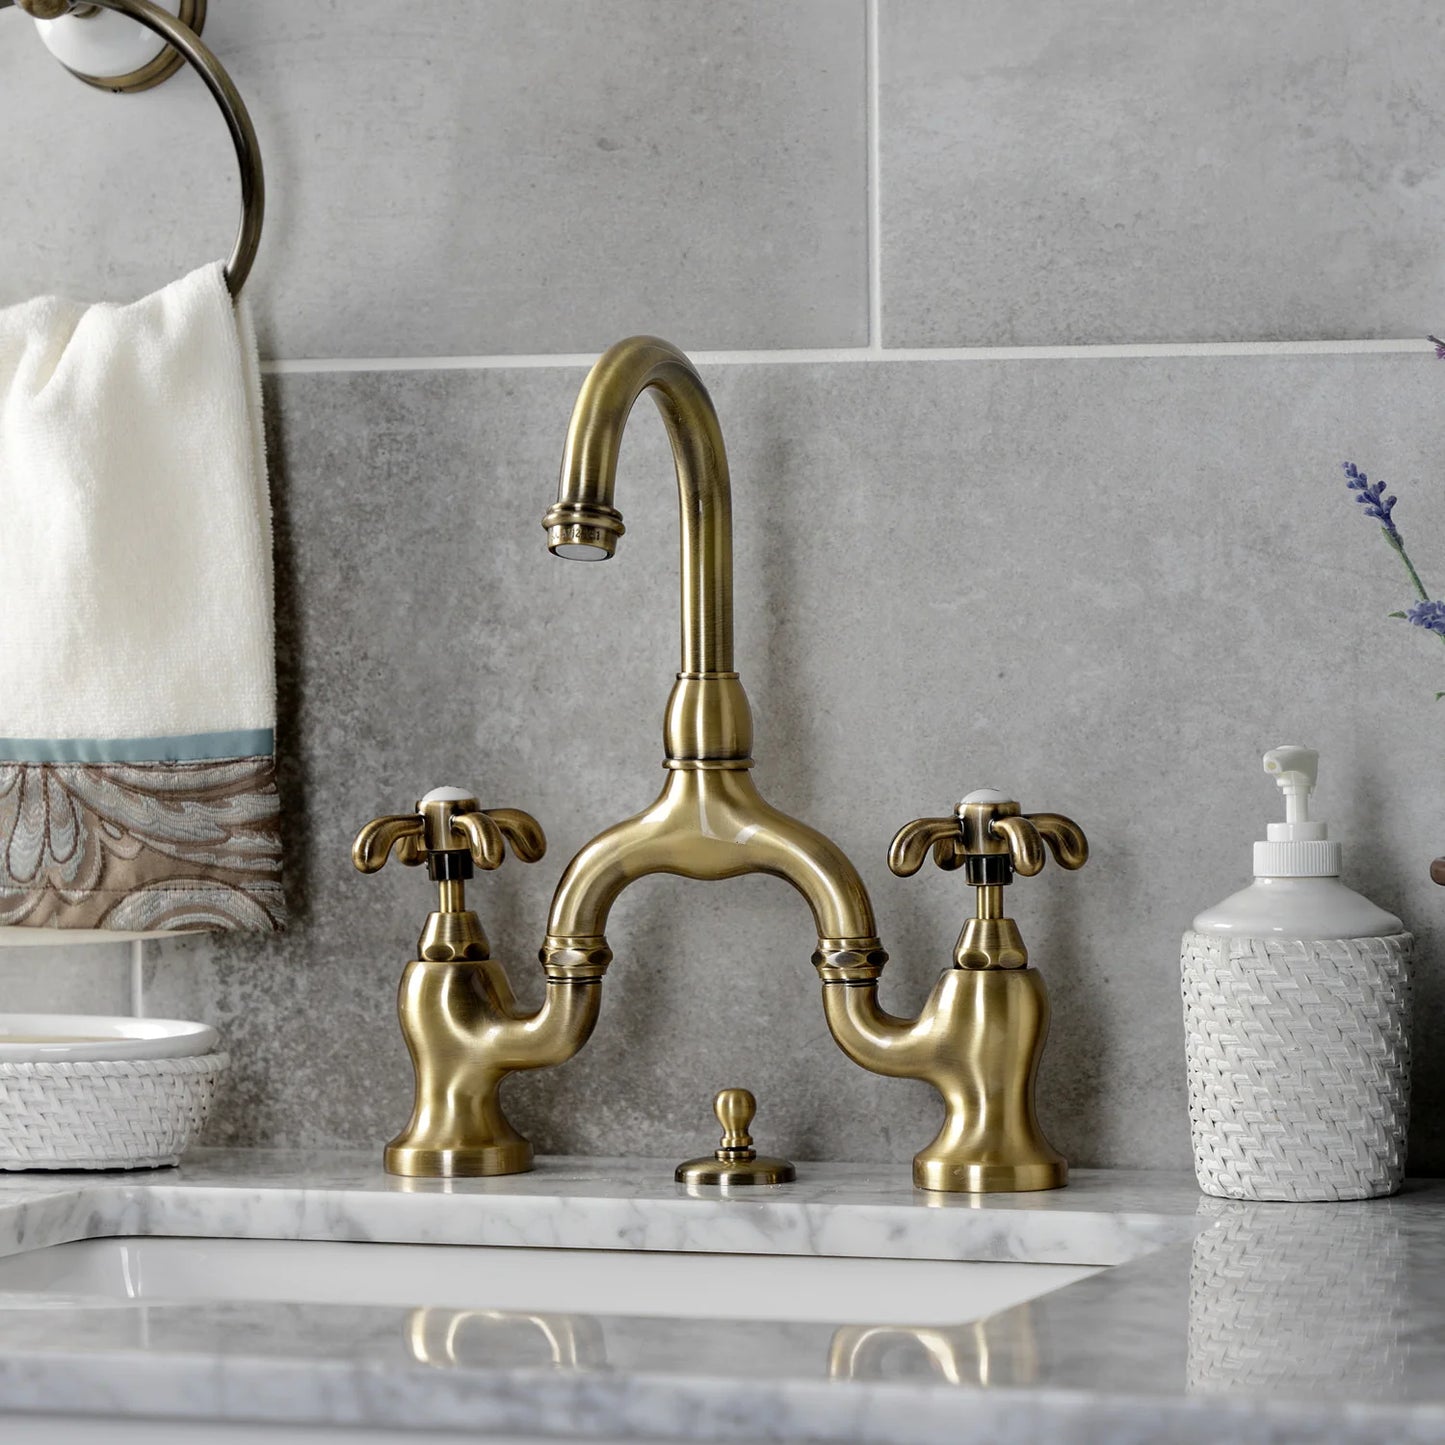 French Country Bridge Bathroom Faucet with Spoke Handles